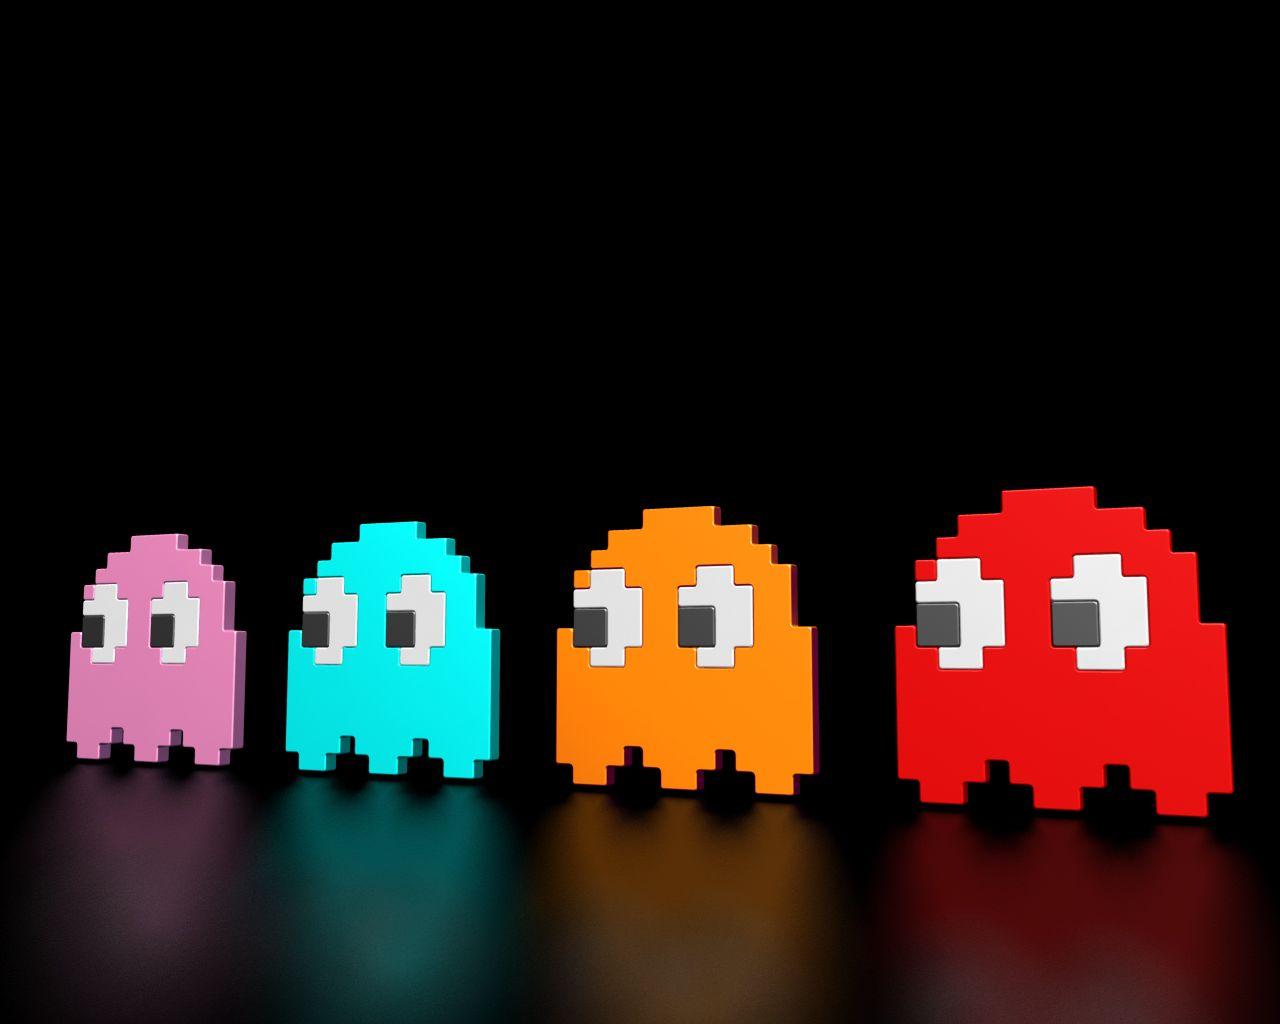 Cool video game wallpaper Monster Cute Ghosts Arcade